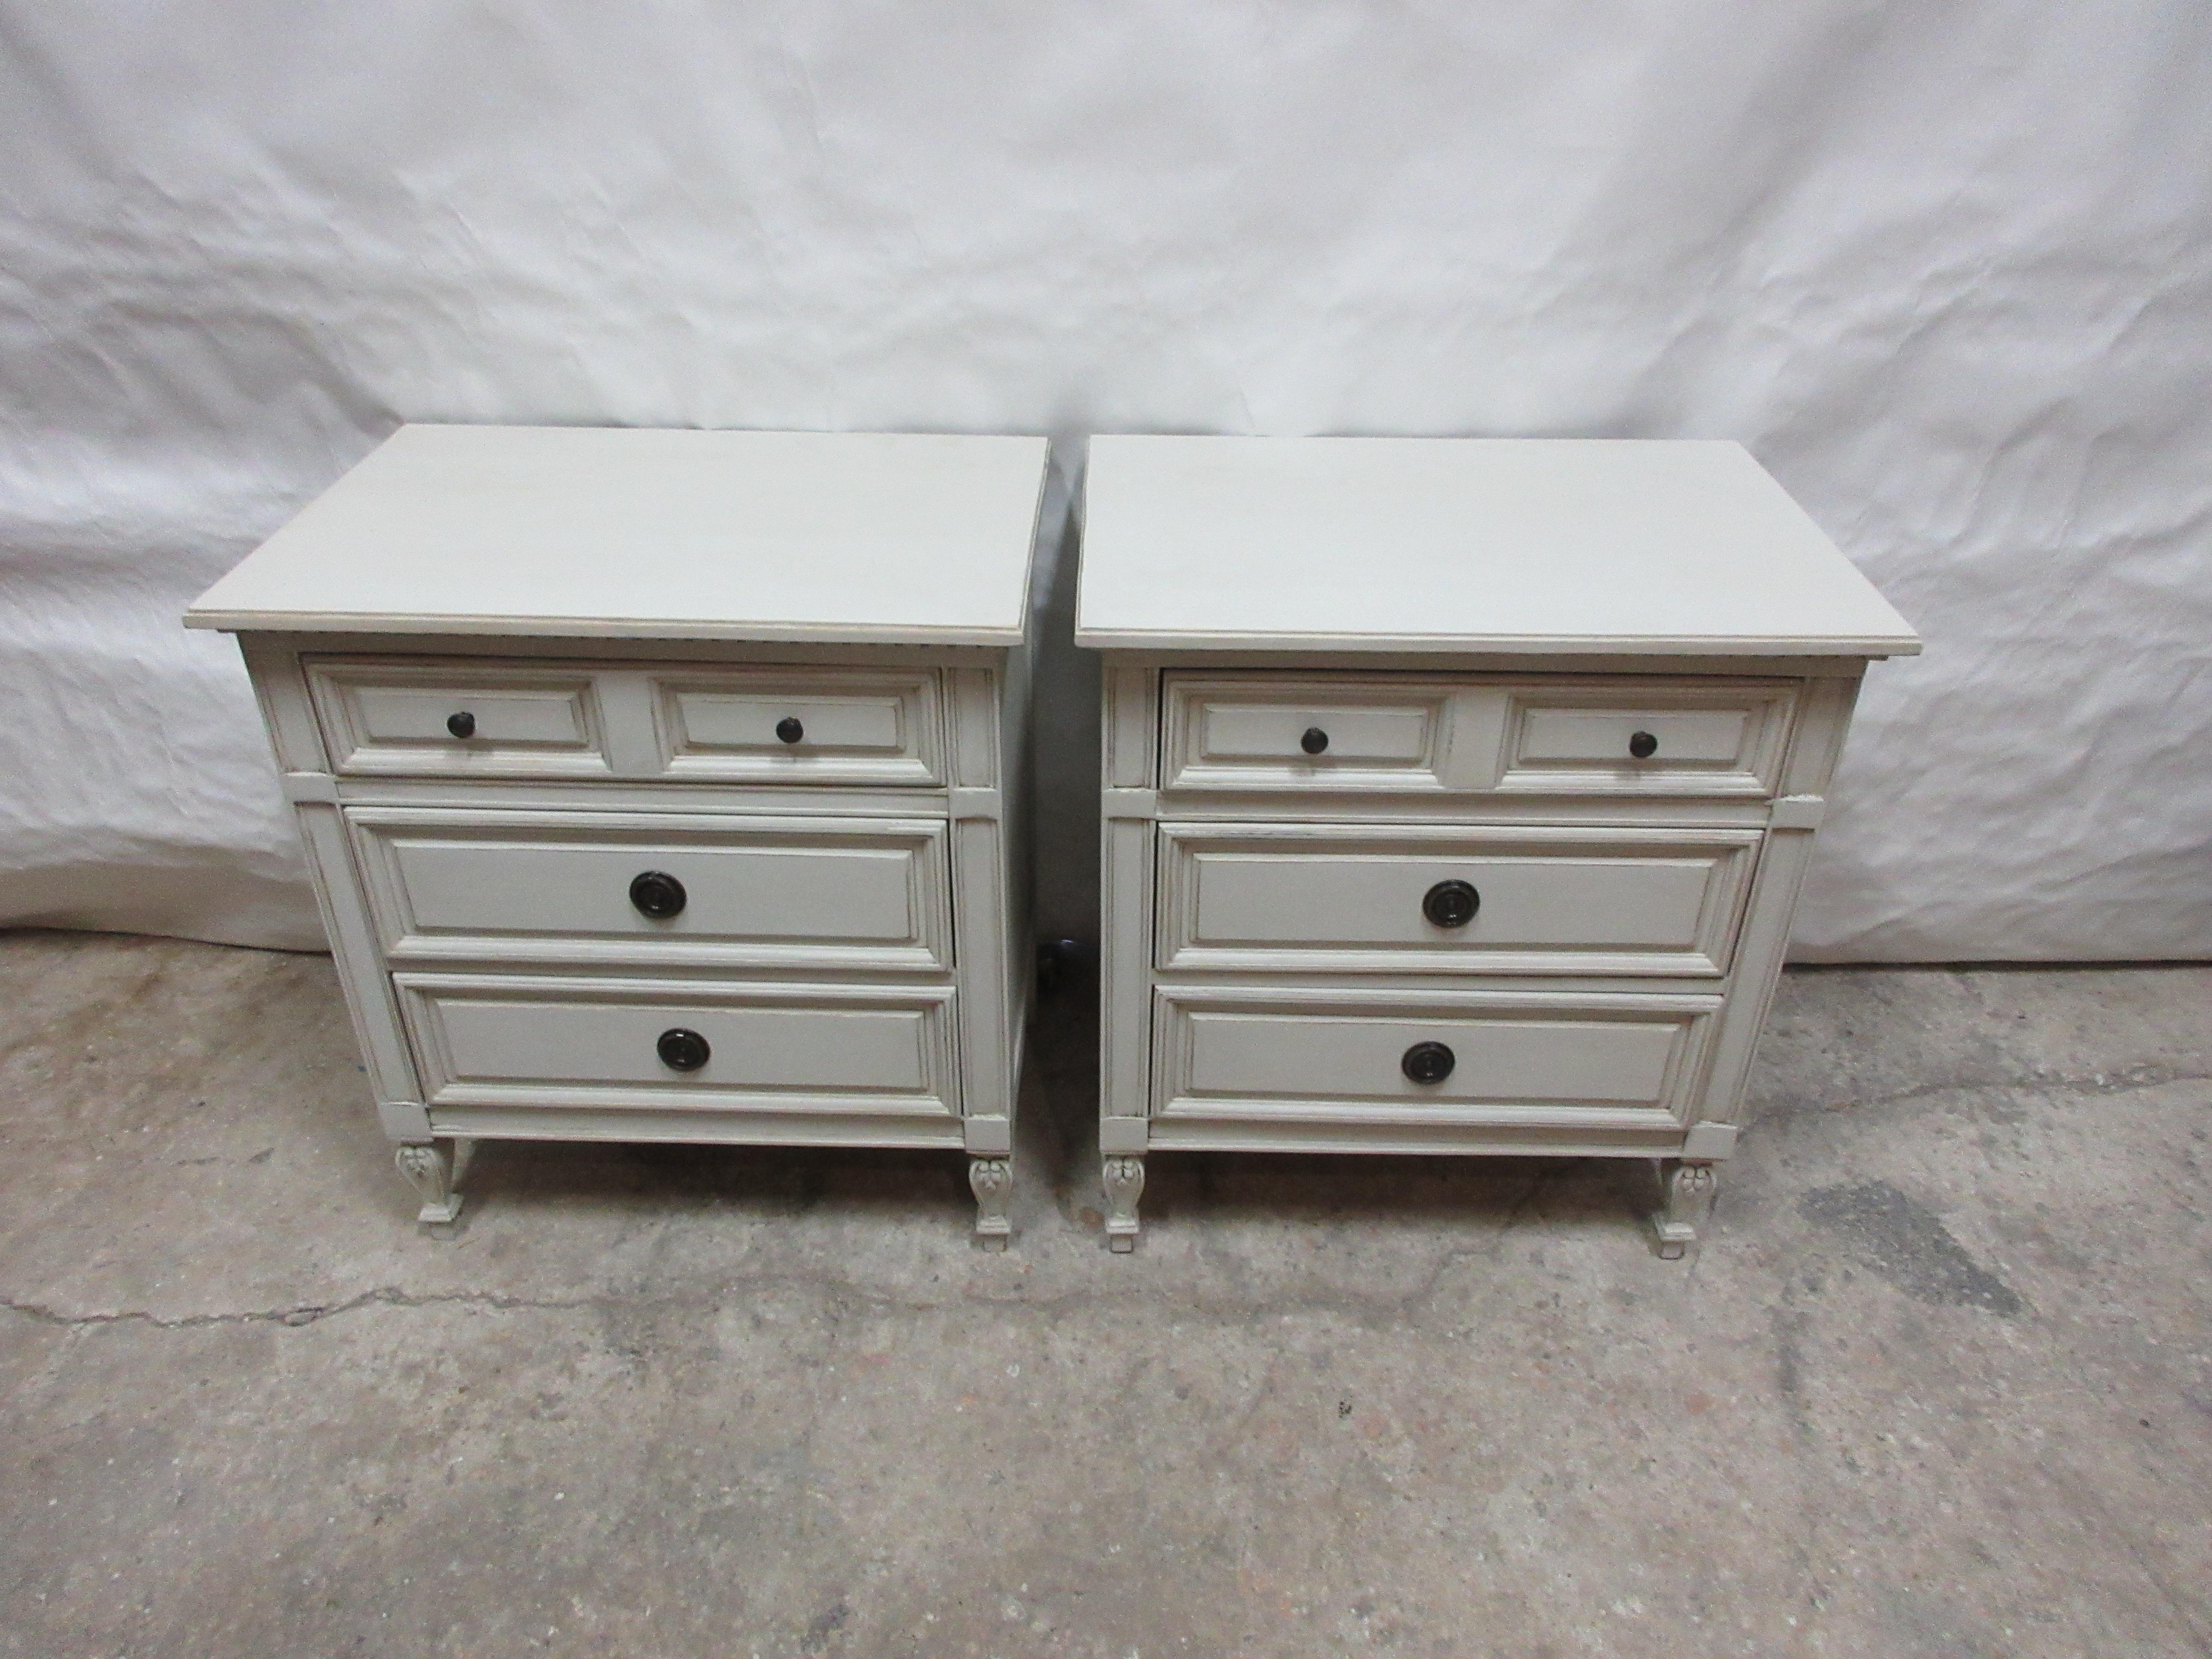 This is a unique set of 2 Gustavian style nightstands, they have been restored and repainted with milk paints oyster white.